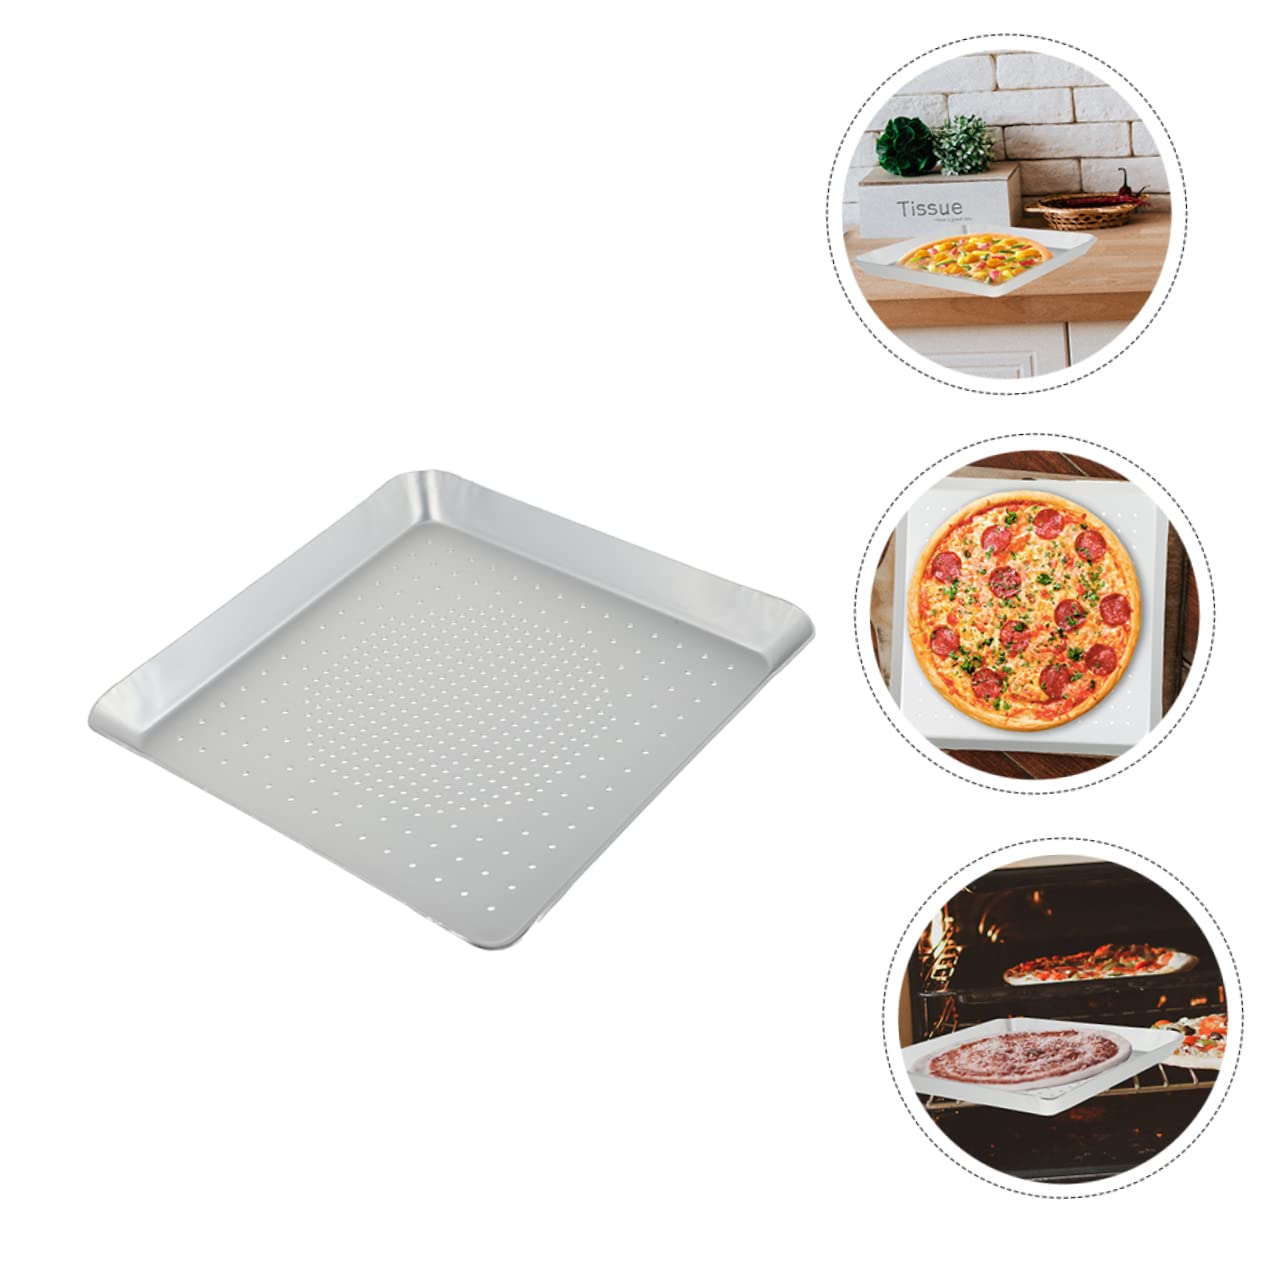 BESTOYARD 1pc Pizza Pan Square Baking Dish Oven Baking Tray Crisper Tray for Oven Toaster Oven Pans Oven Tray Square Pan Pasties Pizza Baking Tray Baking Pan Stainless Steel Aluminum Alloy